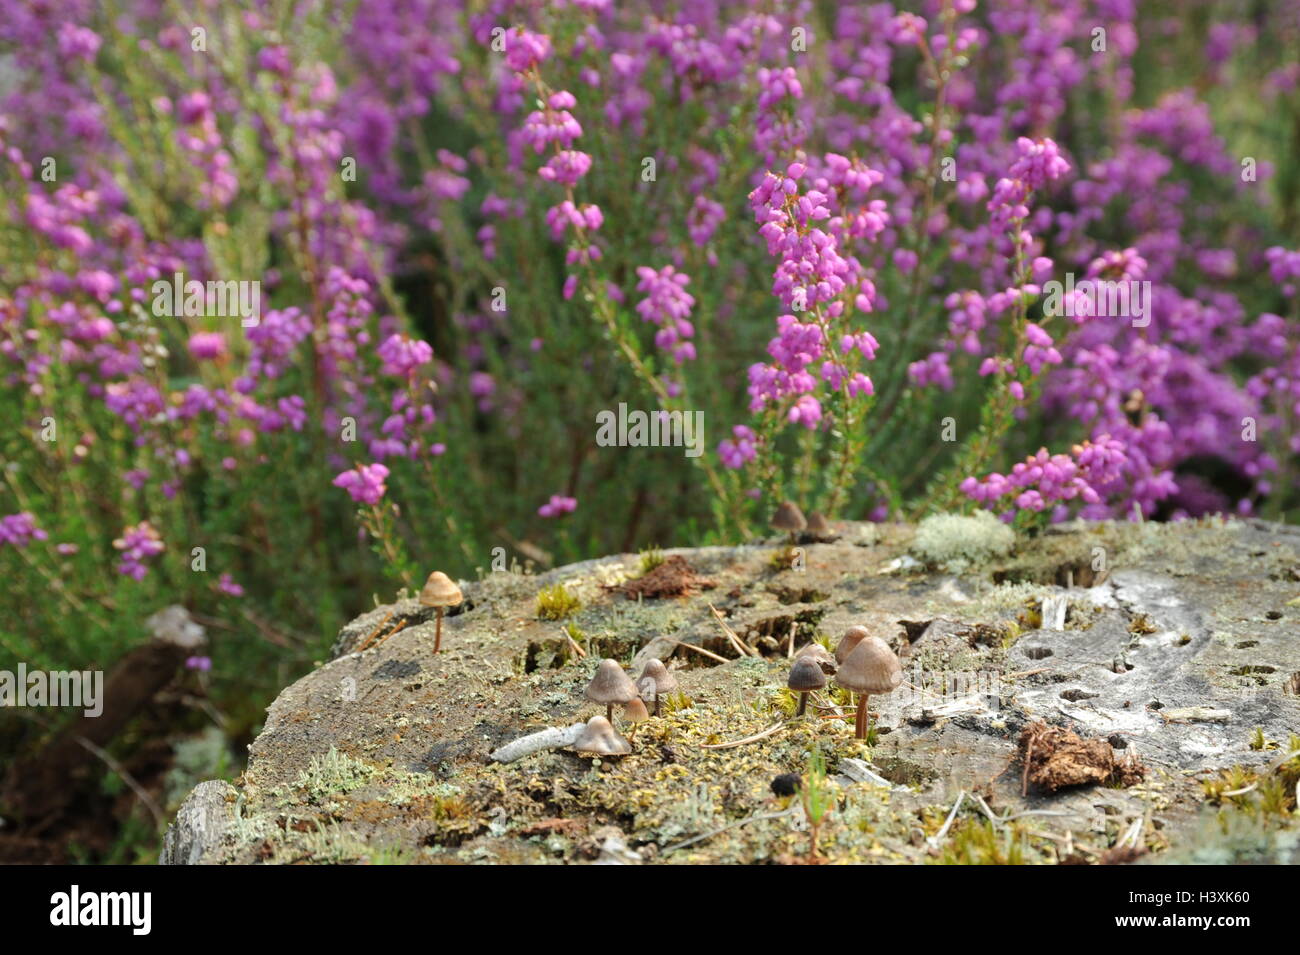 Pink flowering Heather with fungi growing on a tree stump in the fore-ground Stock Photo